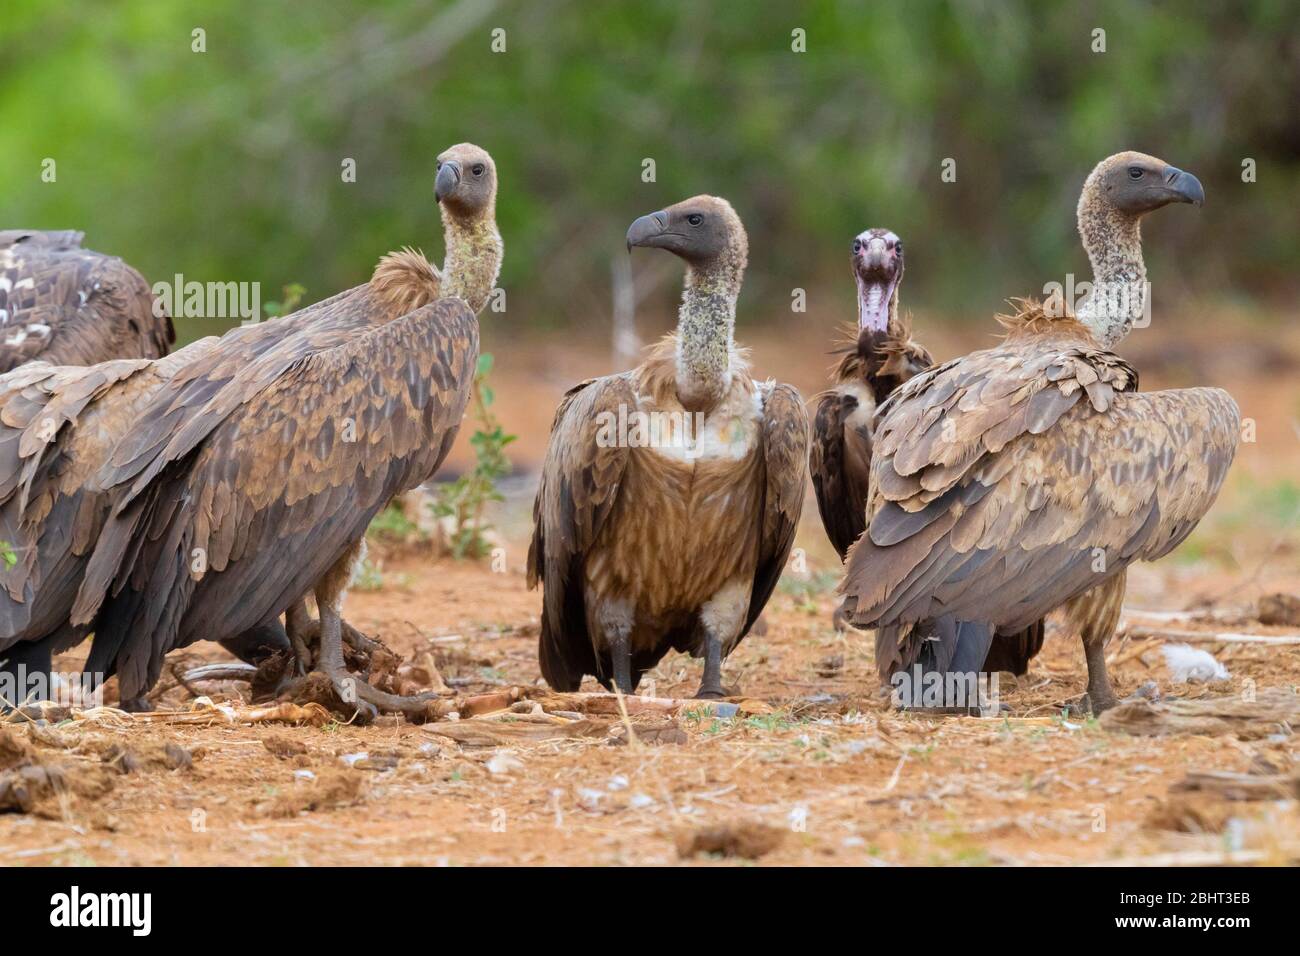 White-backed Vulture (Gyps africanus), immature standing on the ground together with a Hooded Vulture, Mpumalanga, South Africa Stock Photo